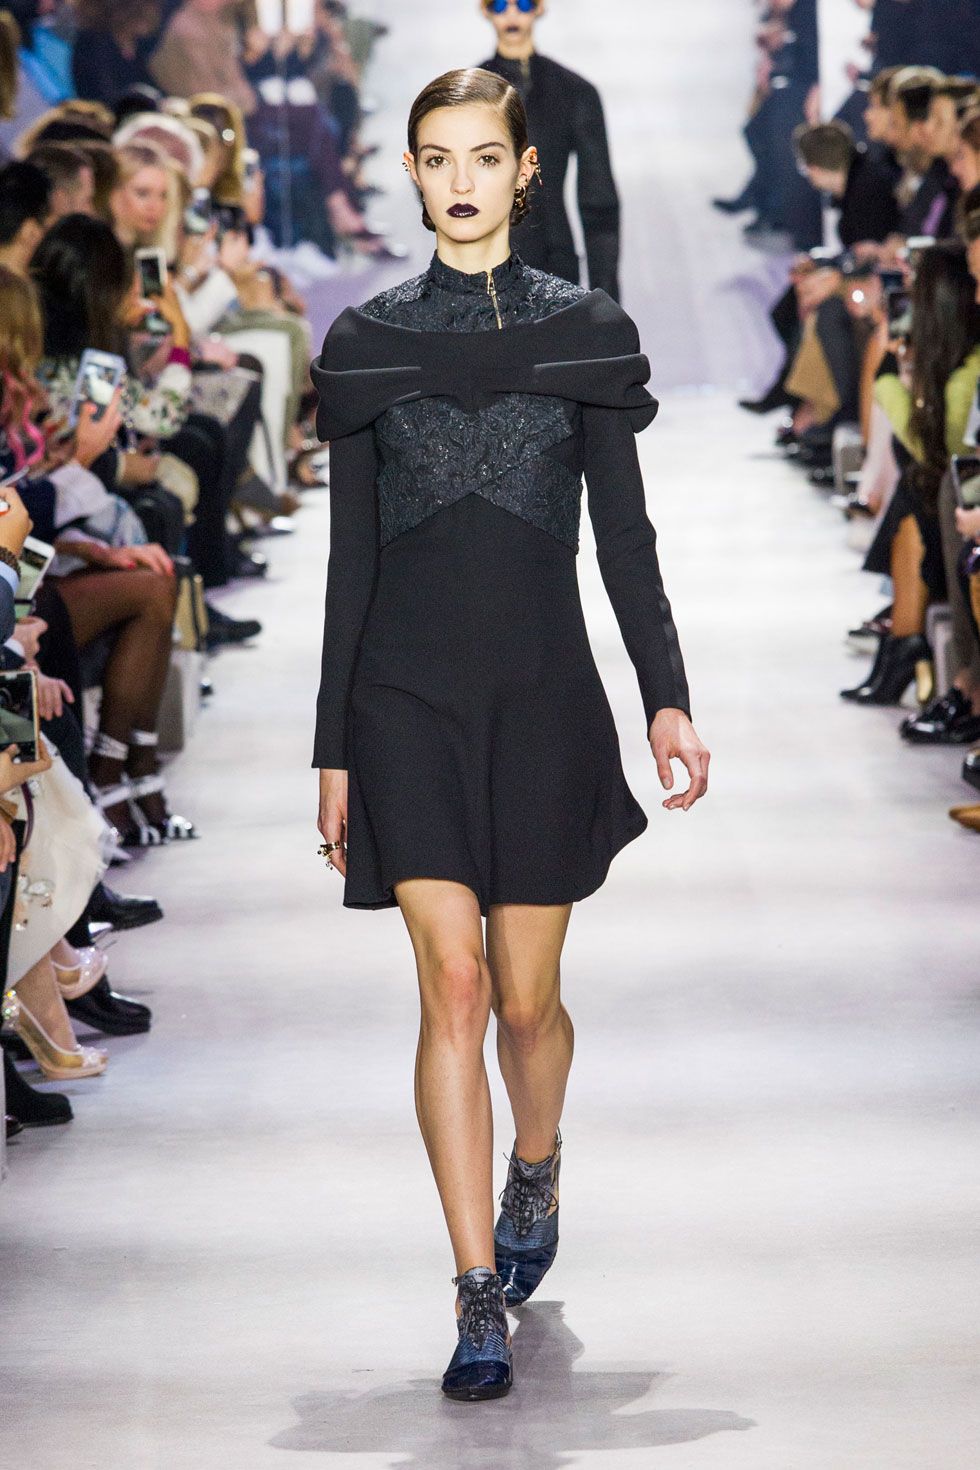 All the Looks From the Christian Dior Fall 2016 ReadytoWear Show